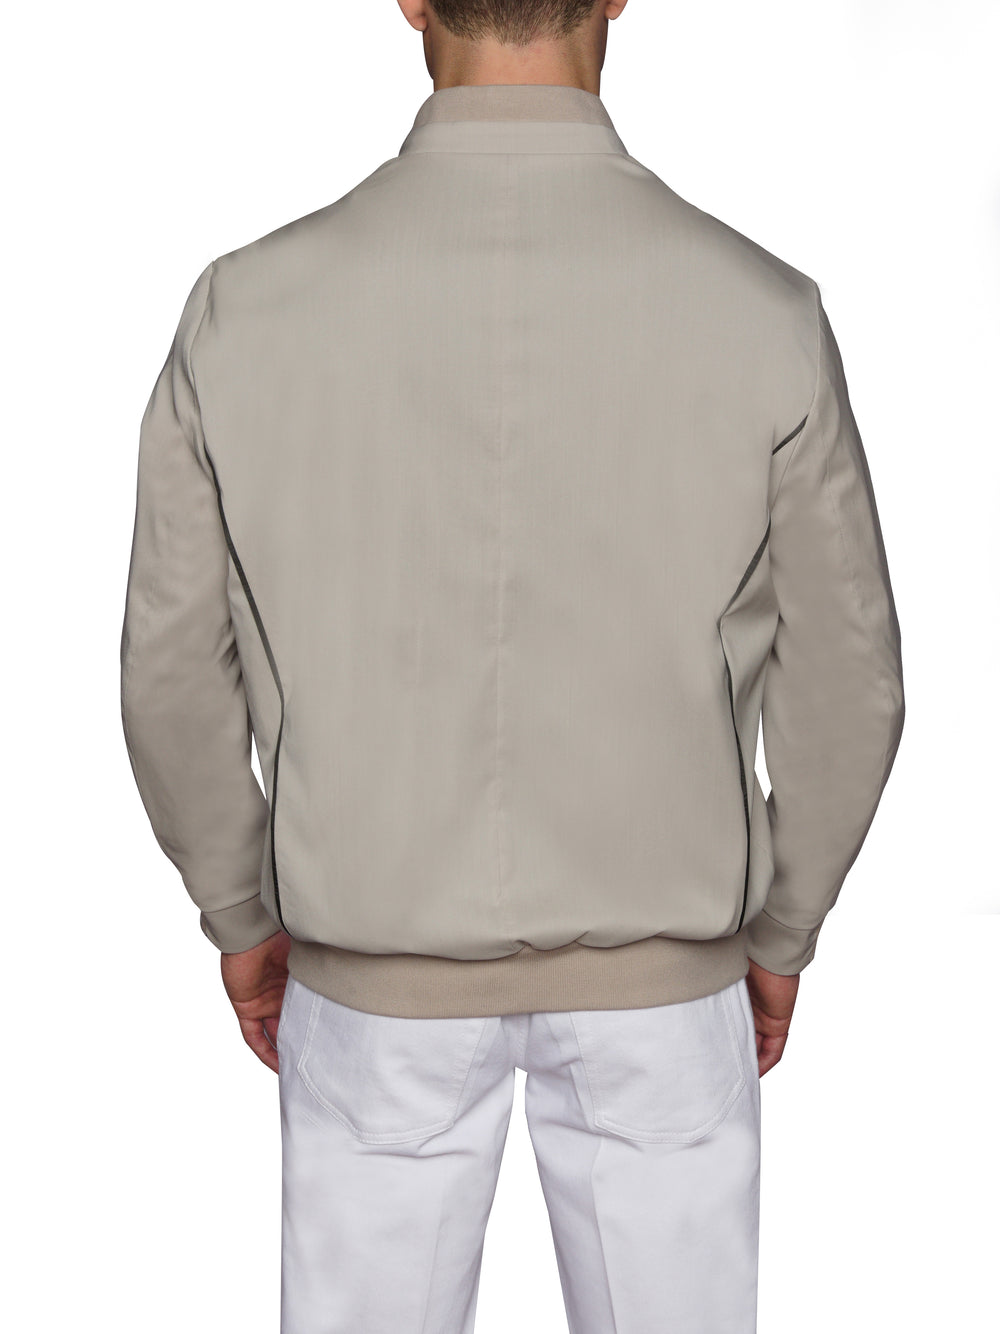 Sirocco Wool and Silk Bomber Jacket